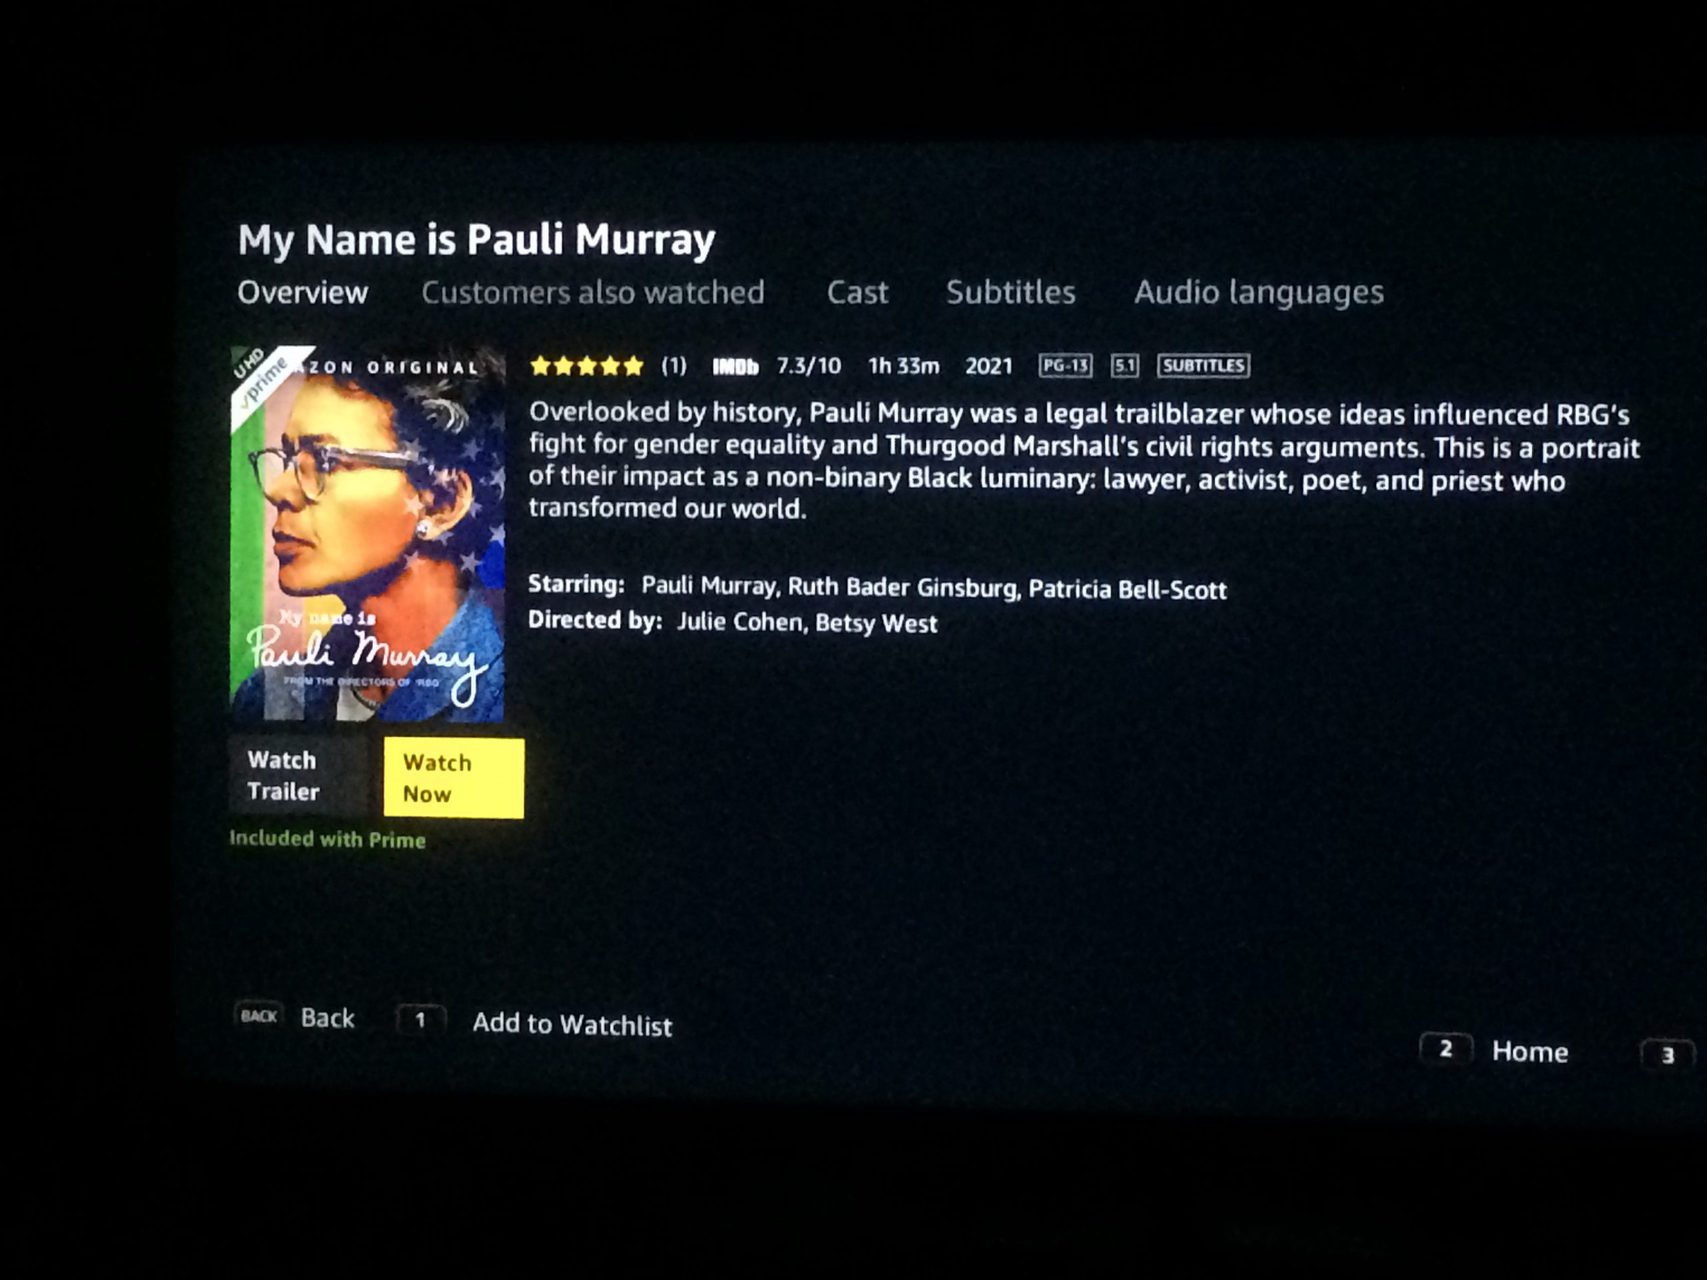 amazon video overview of documentary, My Name is Pauli Murray